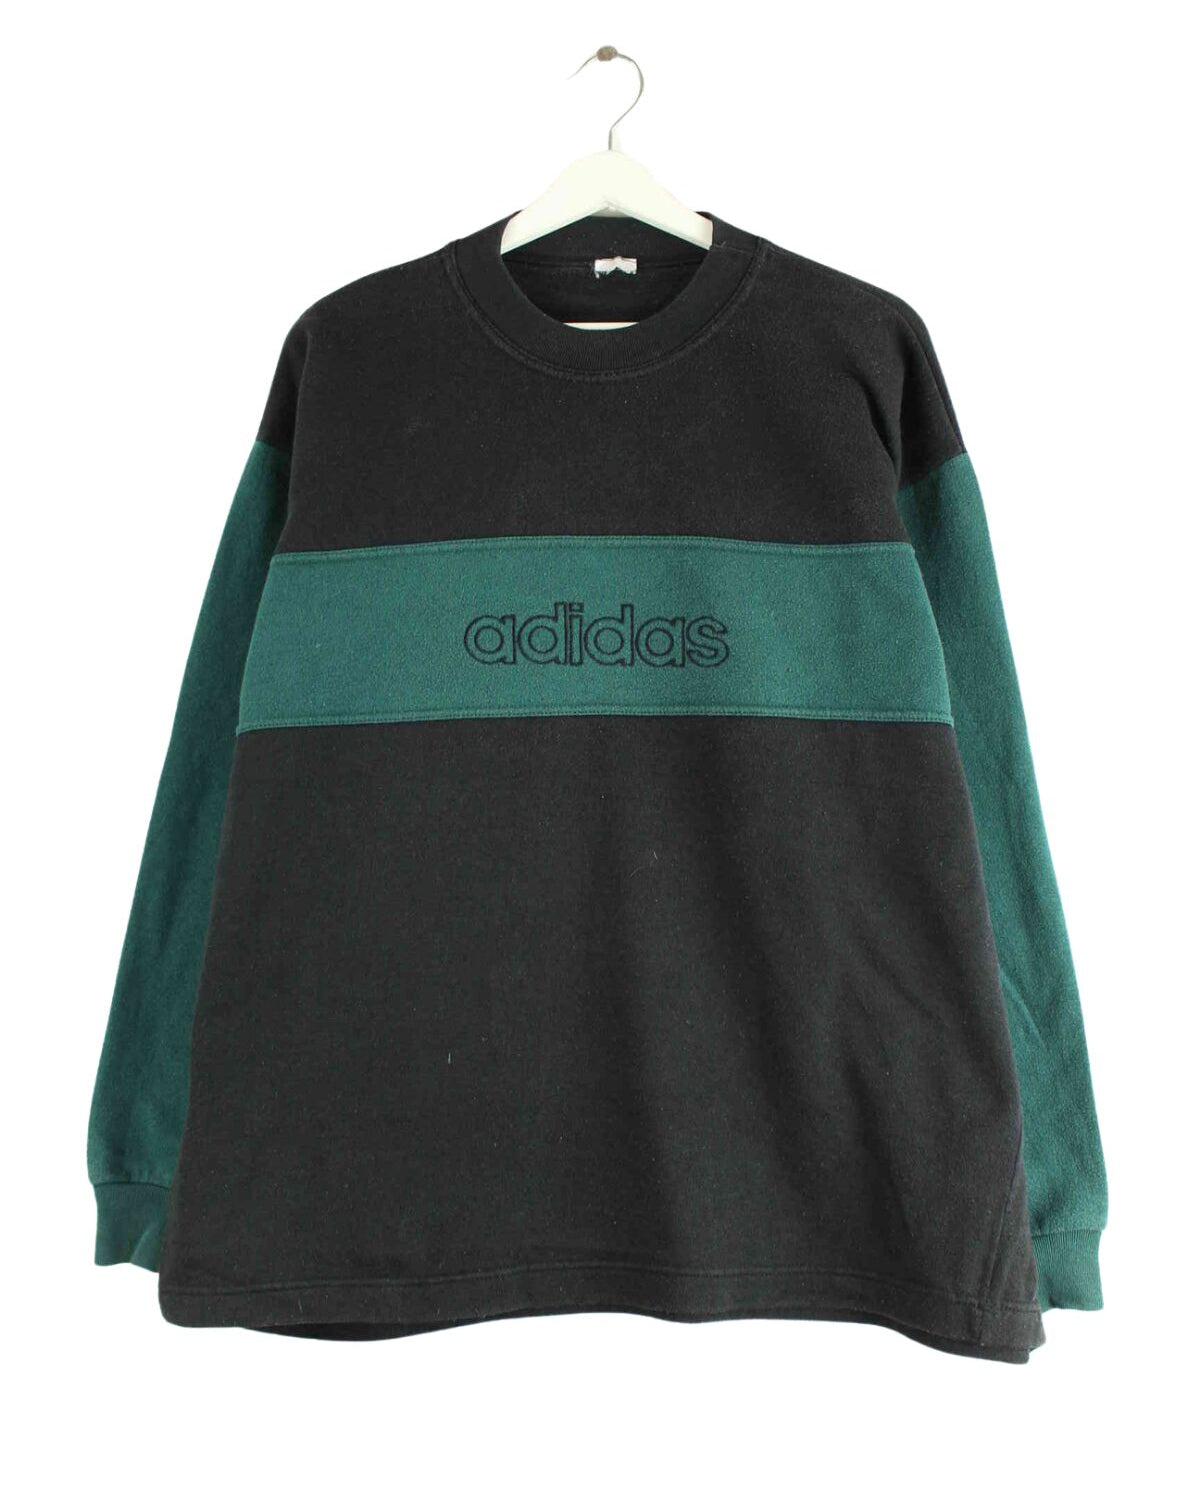 Adidas 90s Vintage Spellout Embroidered Sweater Schwarz M (front image)